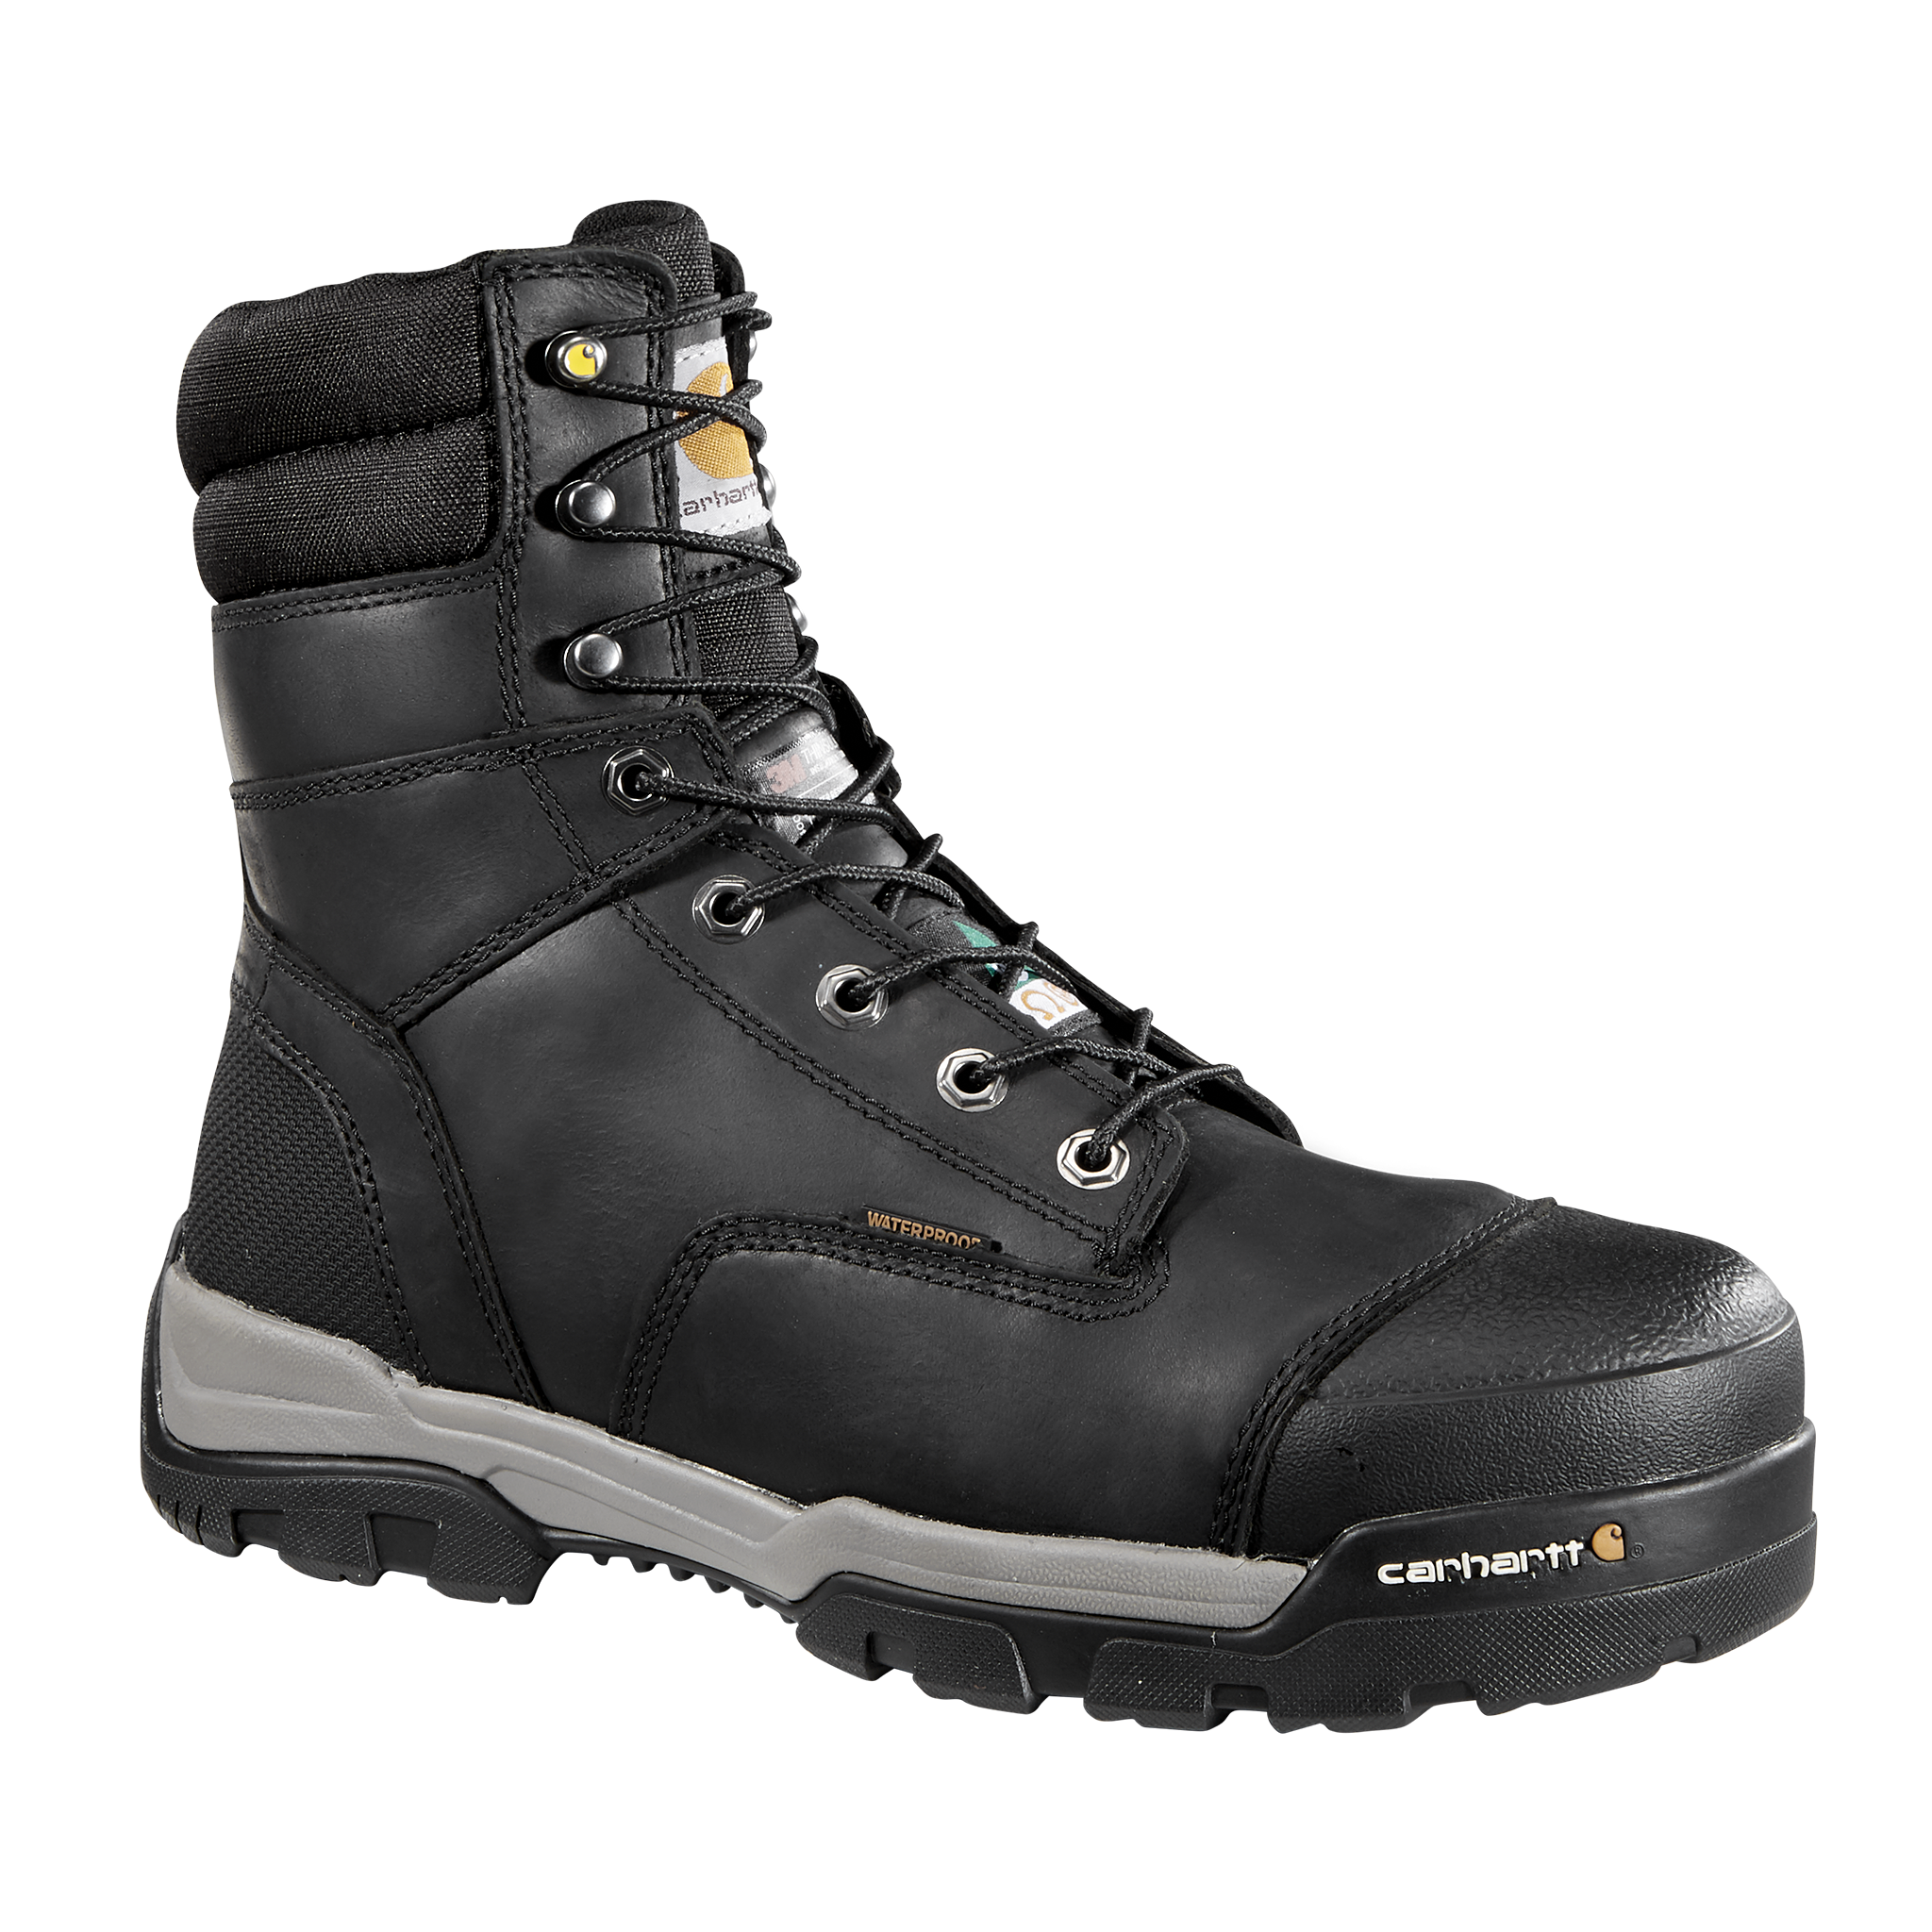 Carhartt Ground Force 8"" CSA Insulated Waterproof Composite Toe Work Boots for Men